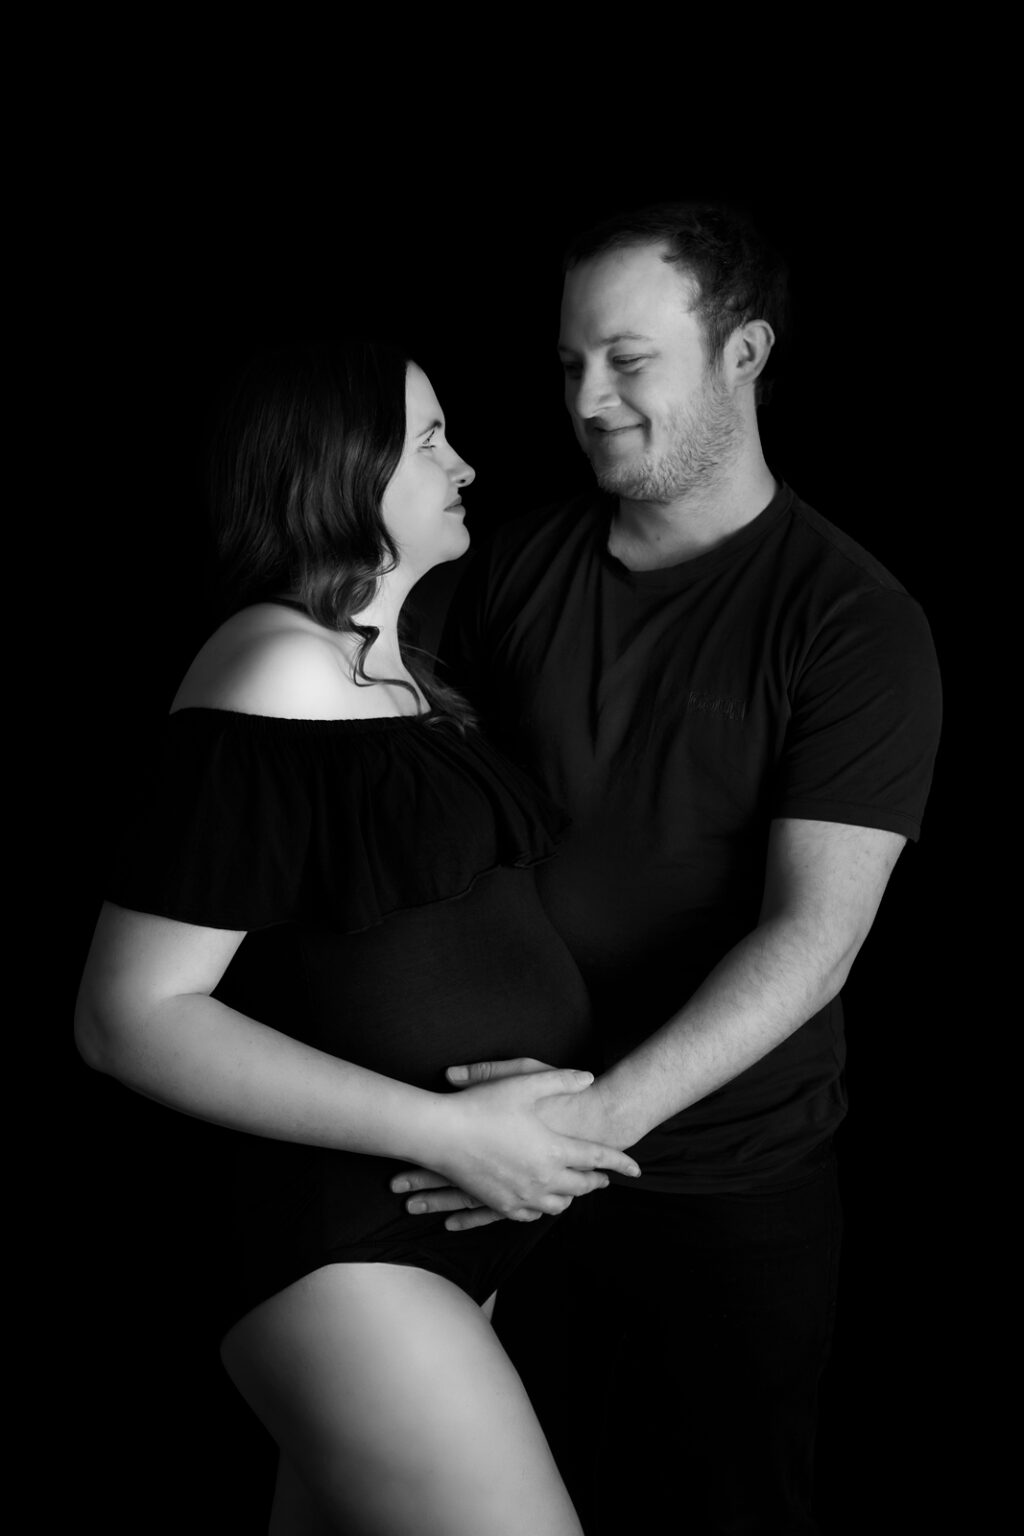 Expecting couple posing in black and white, smiling into each others eyes.